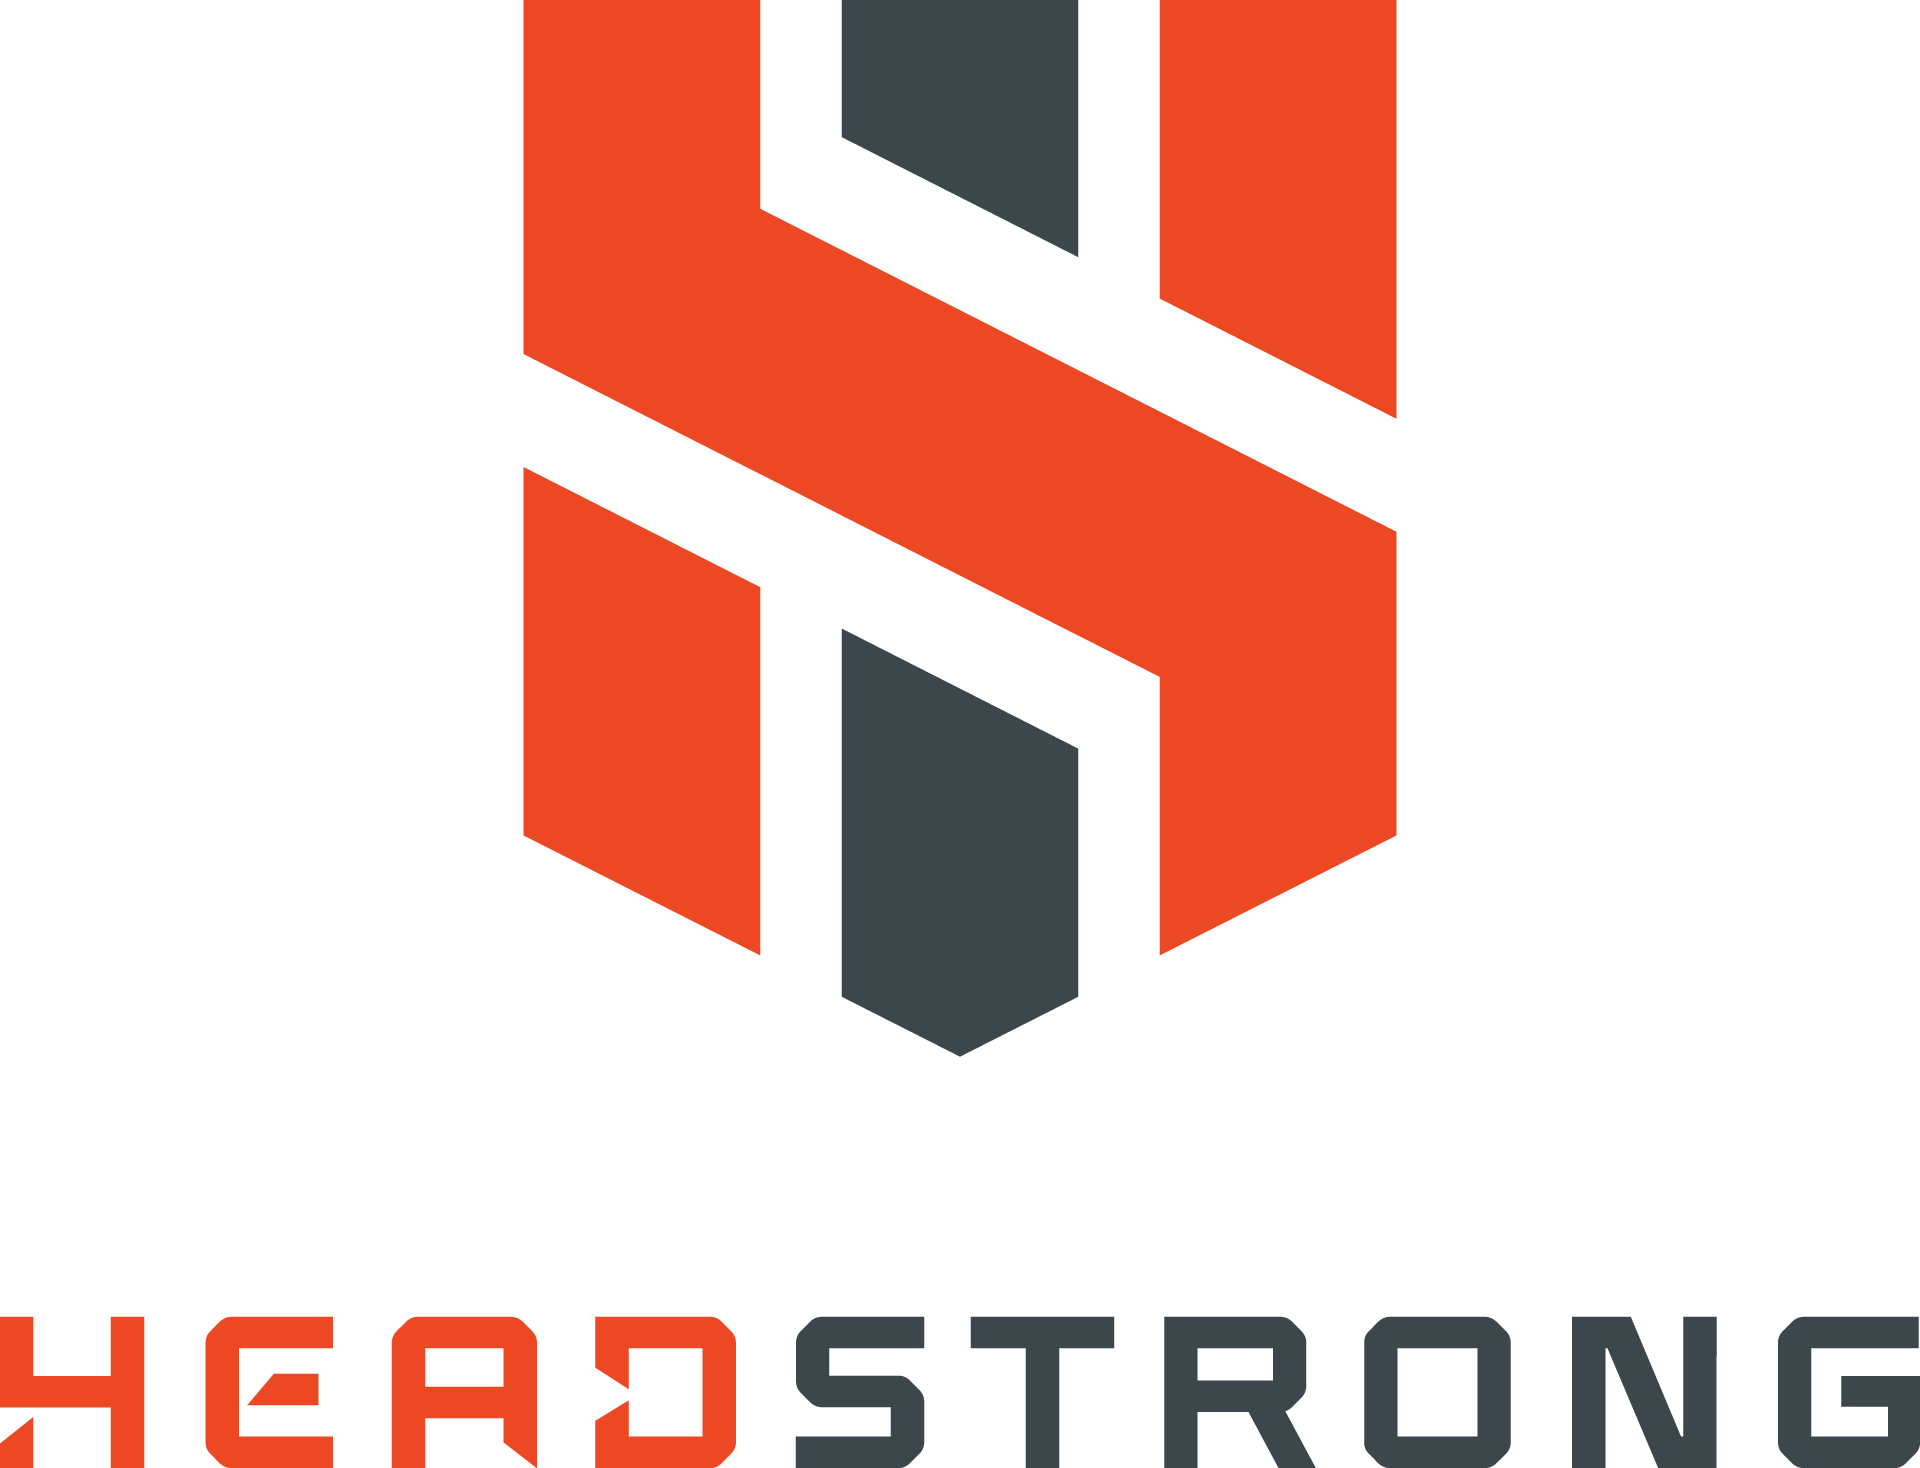 The Headstrong Project